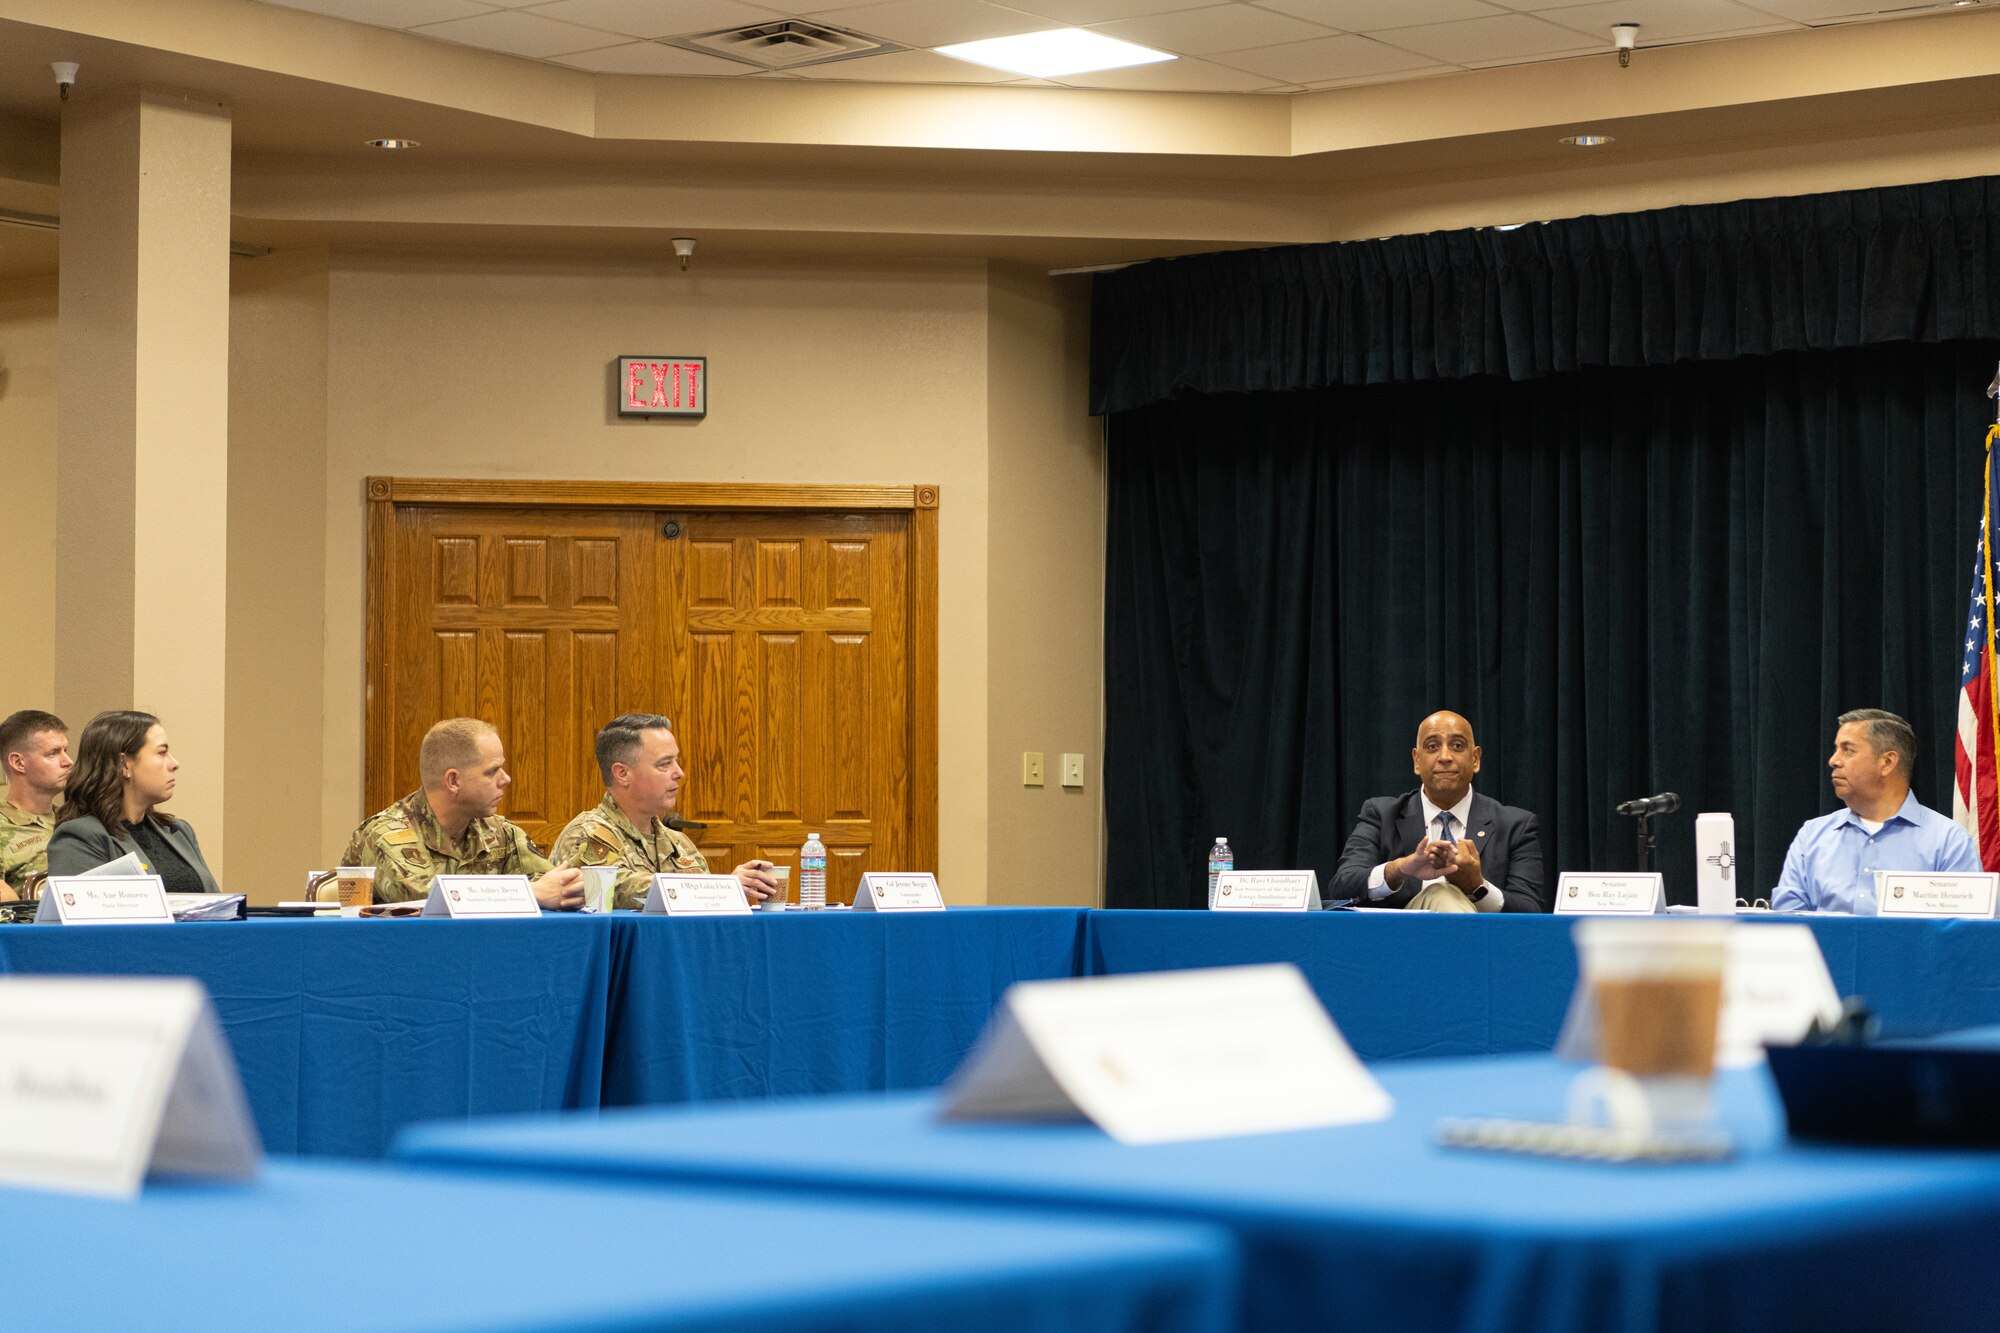 The Honorable Dr. Ravi Chaudhary, Assistant Secretary of the Air Force for Energy, Installations and Environment, speaks during a discussion with community leaders at Cannon Air Force Base, N.M., Aug. 22, 2023. Lt. Gen. Tony Bauernfeind, Air Force Special Operations Command commander and the 27 Special Operations Wing leadership team hosted a meeting to discuss transforming AFSOC force structure for a fifth power projection wing, greater force development, and growth for Air Commandos with congressional and community leaders. (U.S. Air Force photo by Senior Airman Drew Cyburt)